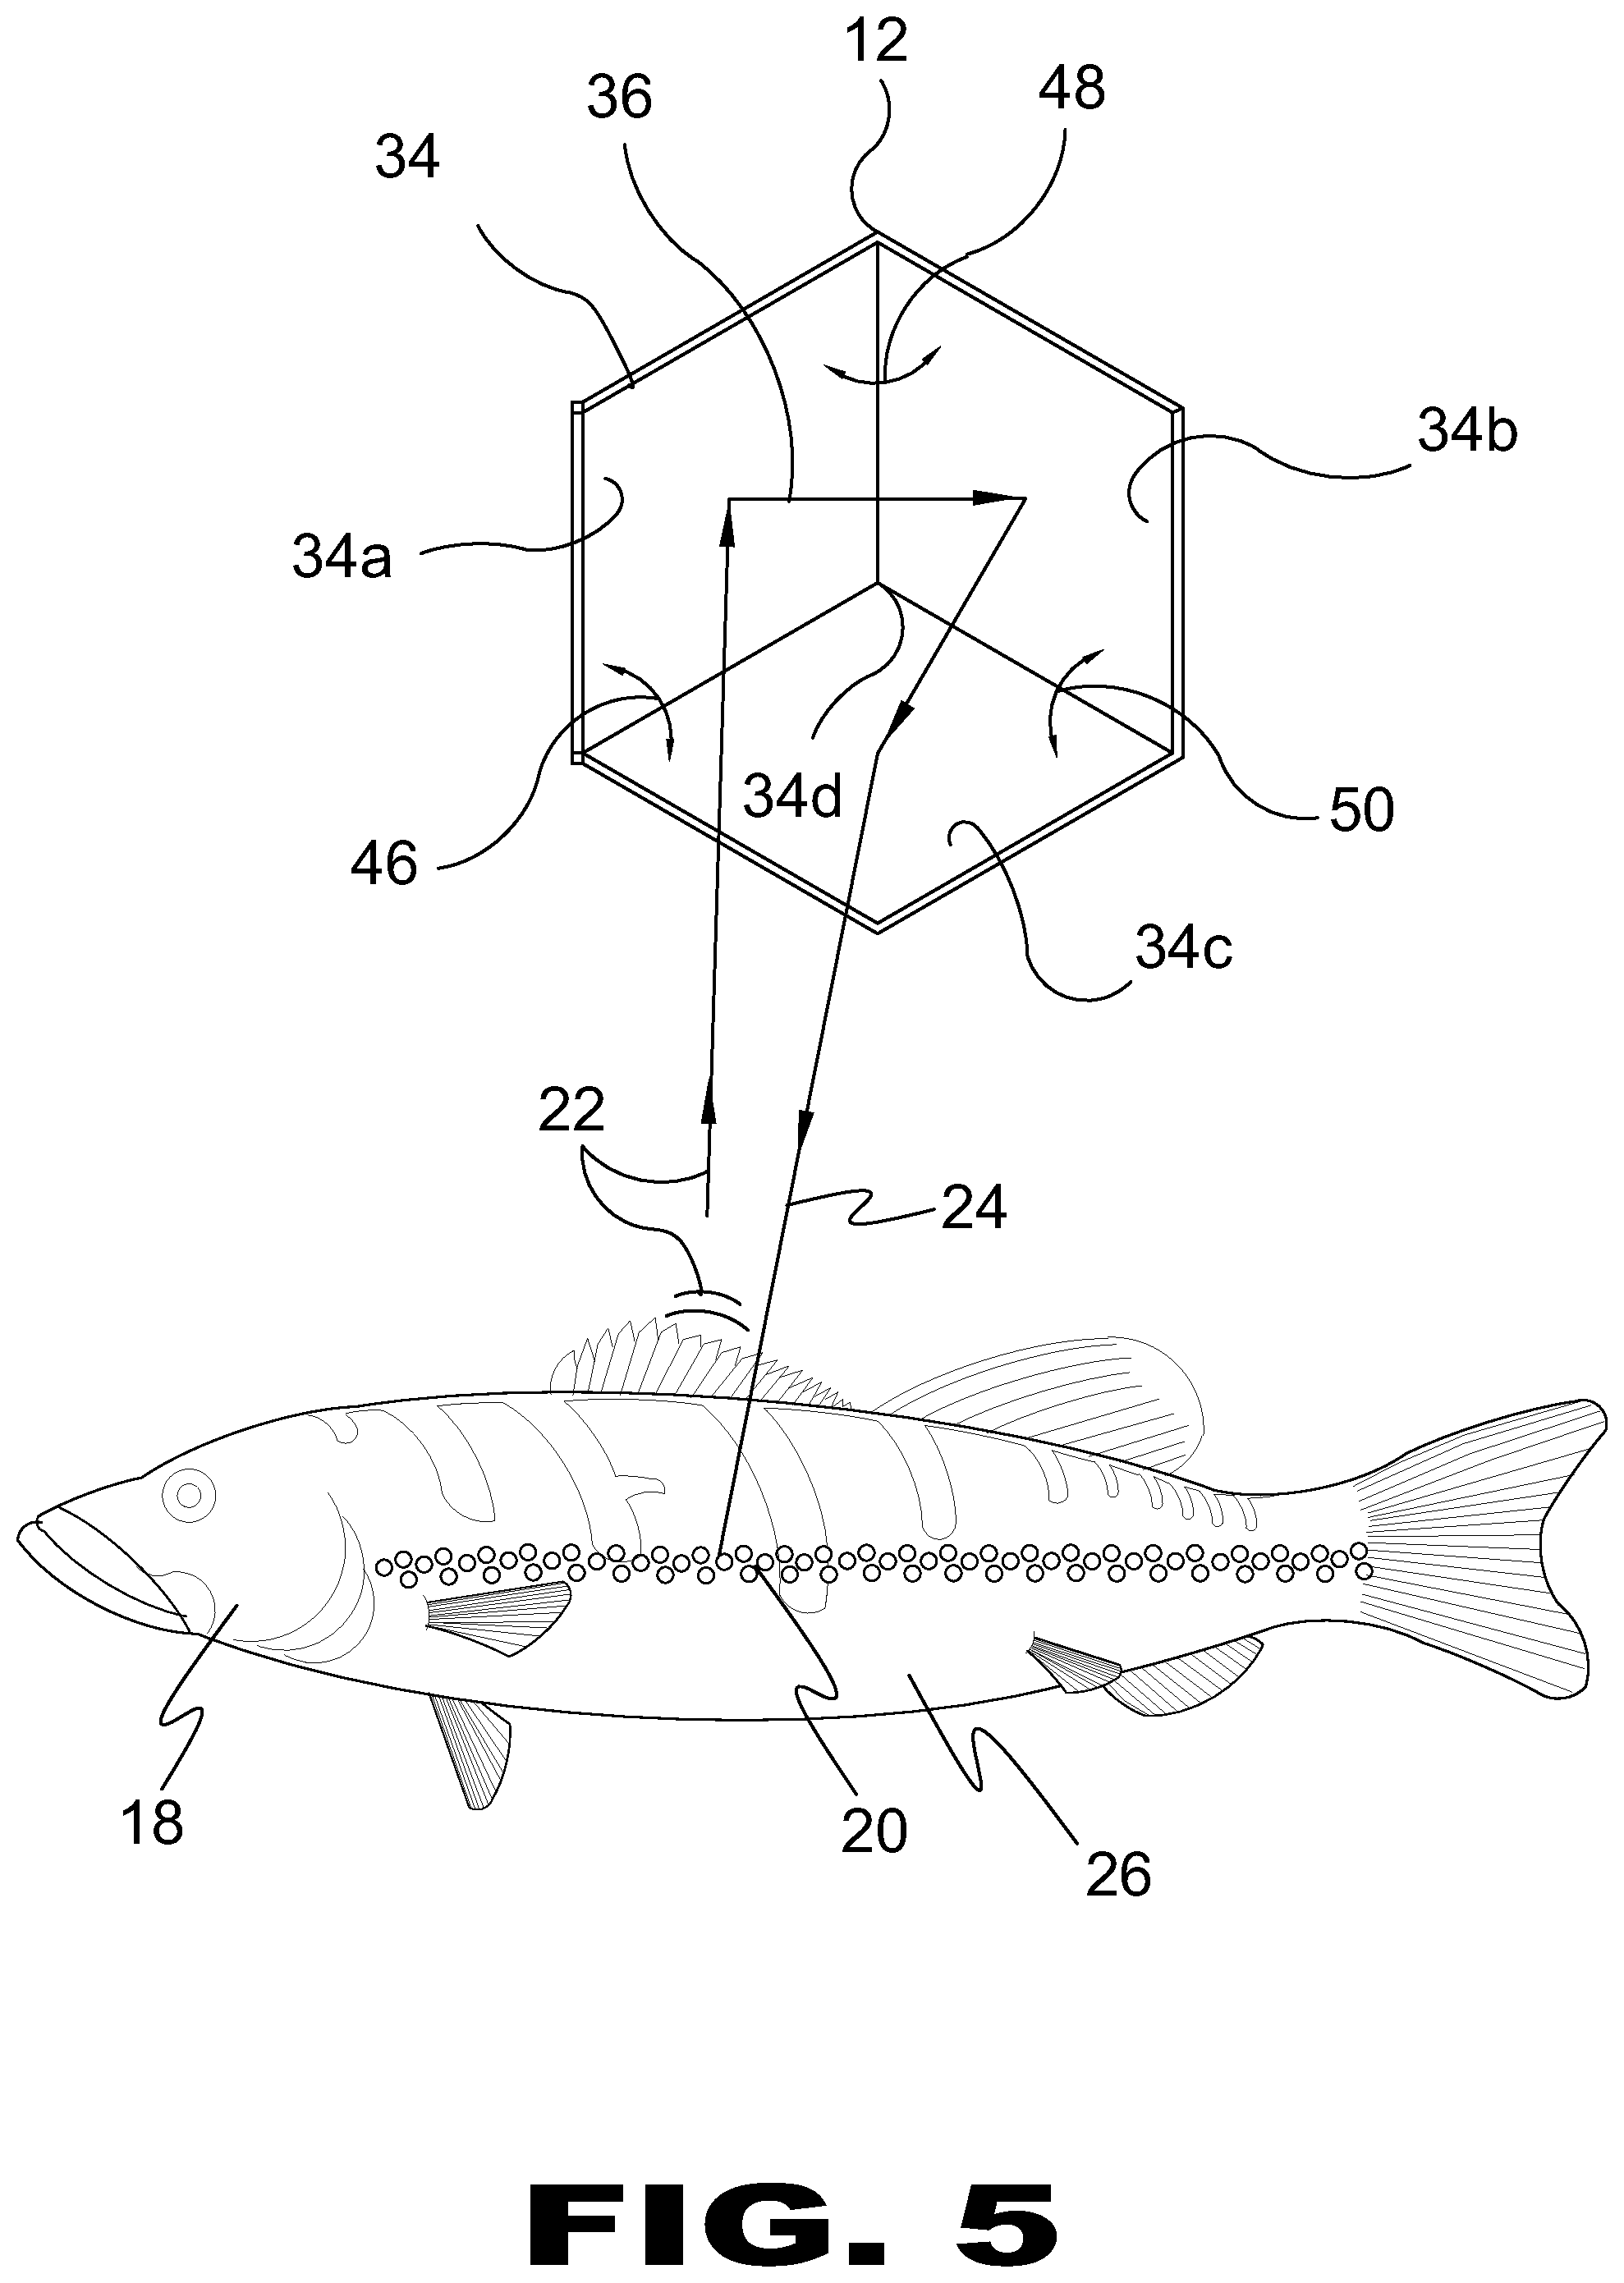 Inside corner cubic surface reflector fishing lure Patent Grant Flasco  February 23, 2 [Flasco; Ray D.]